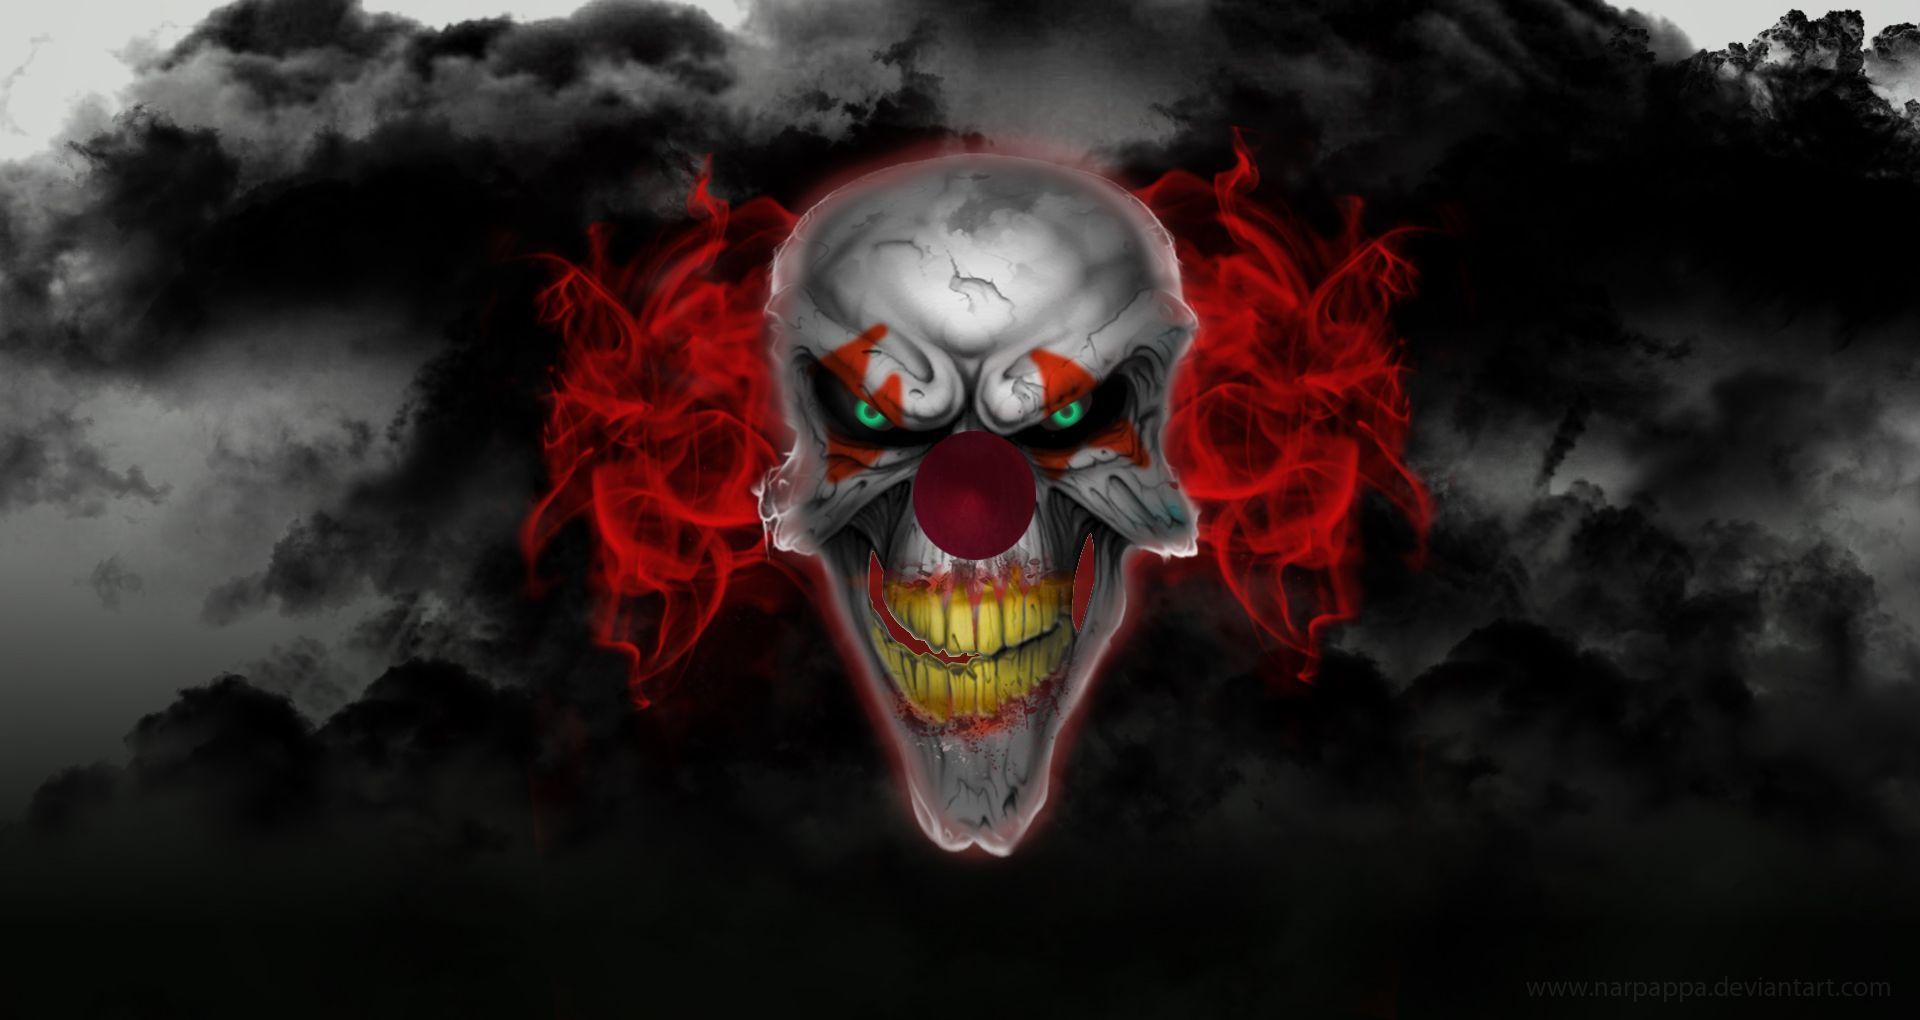 Scary Clown with Red Hair wallpaper from Clowns wallpaper. Always